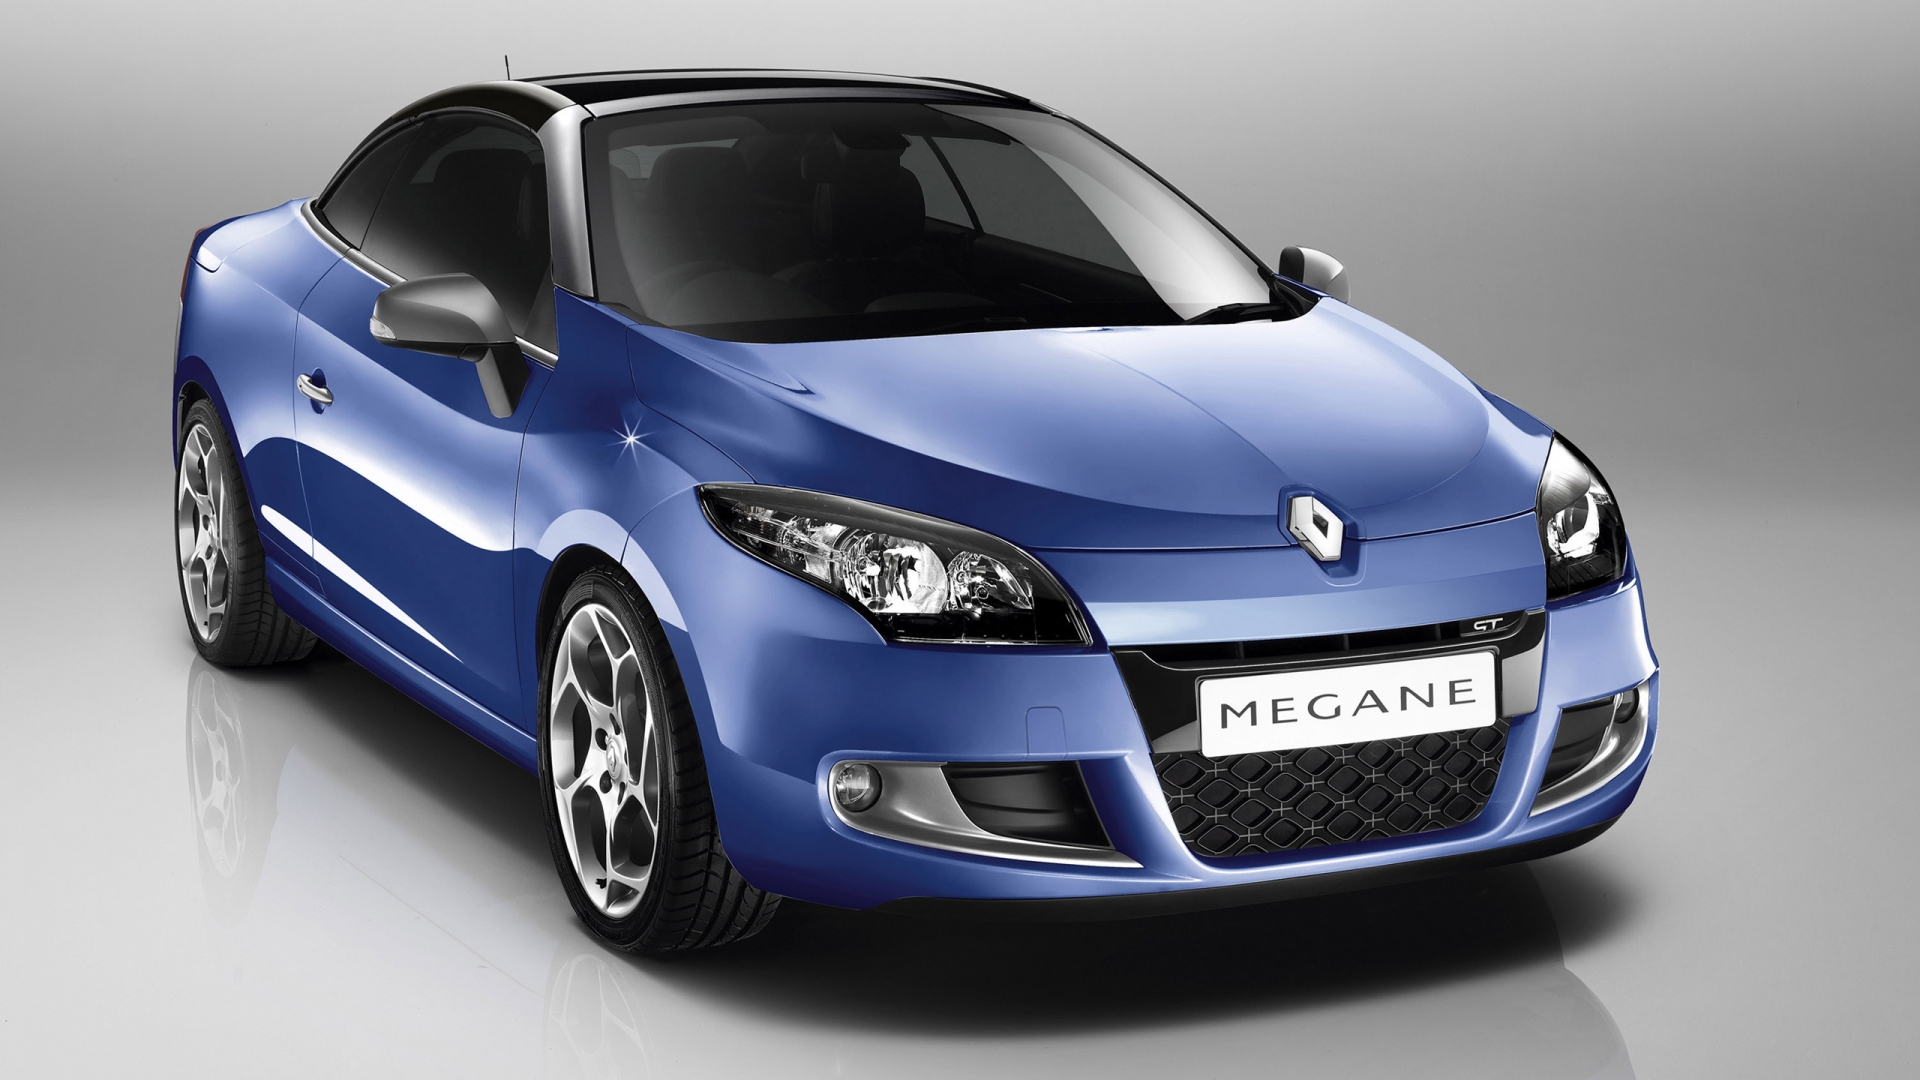 Megane Coupe Cabriolet GT for 1920 x 1080 HDTV 1080p resolution